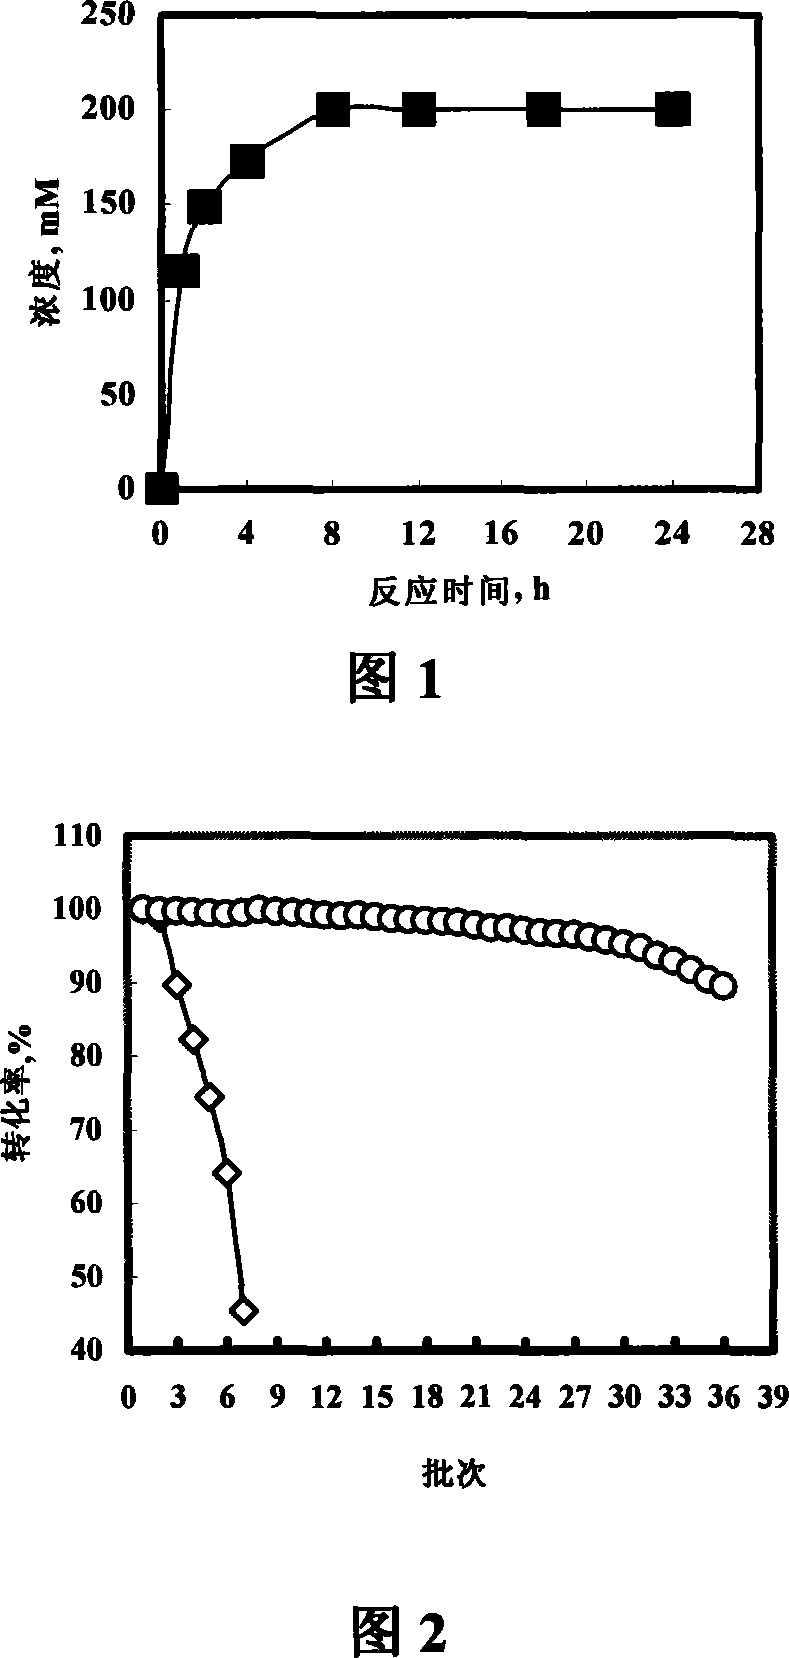 Culture of bacillus alcaligenes and method for preparing glycolic acid by using the same to hydrolyzing nitrile